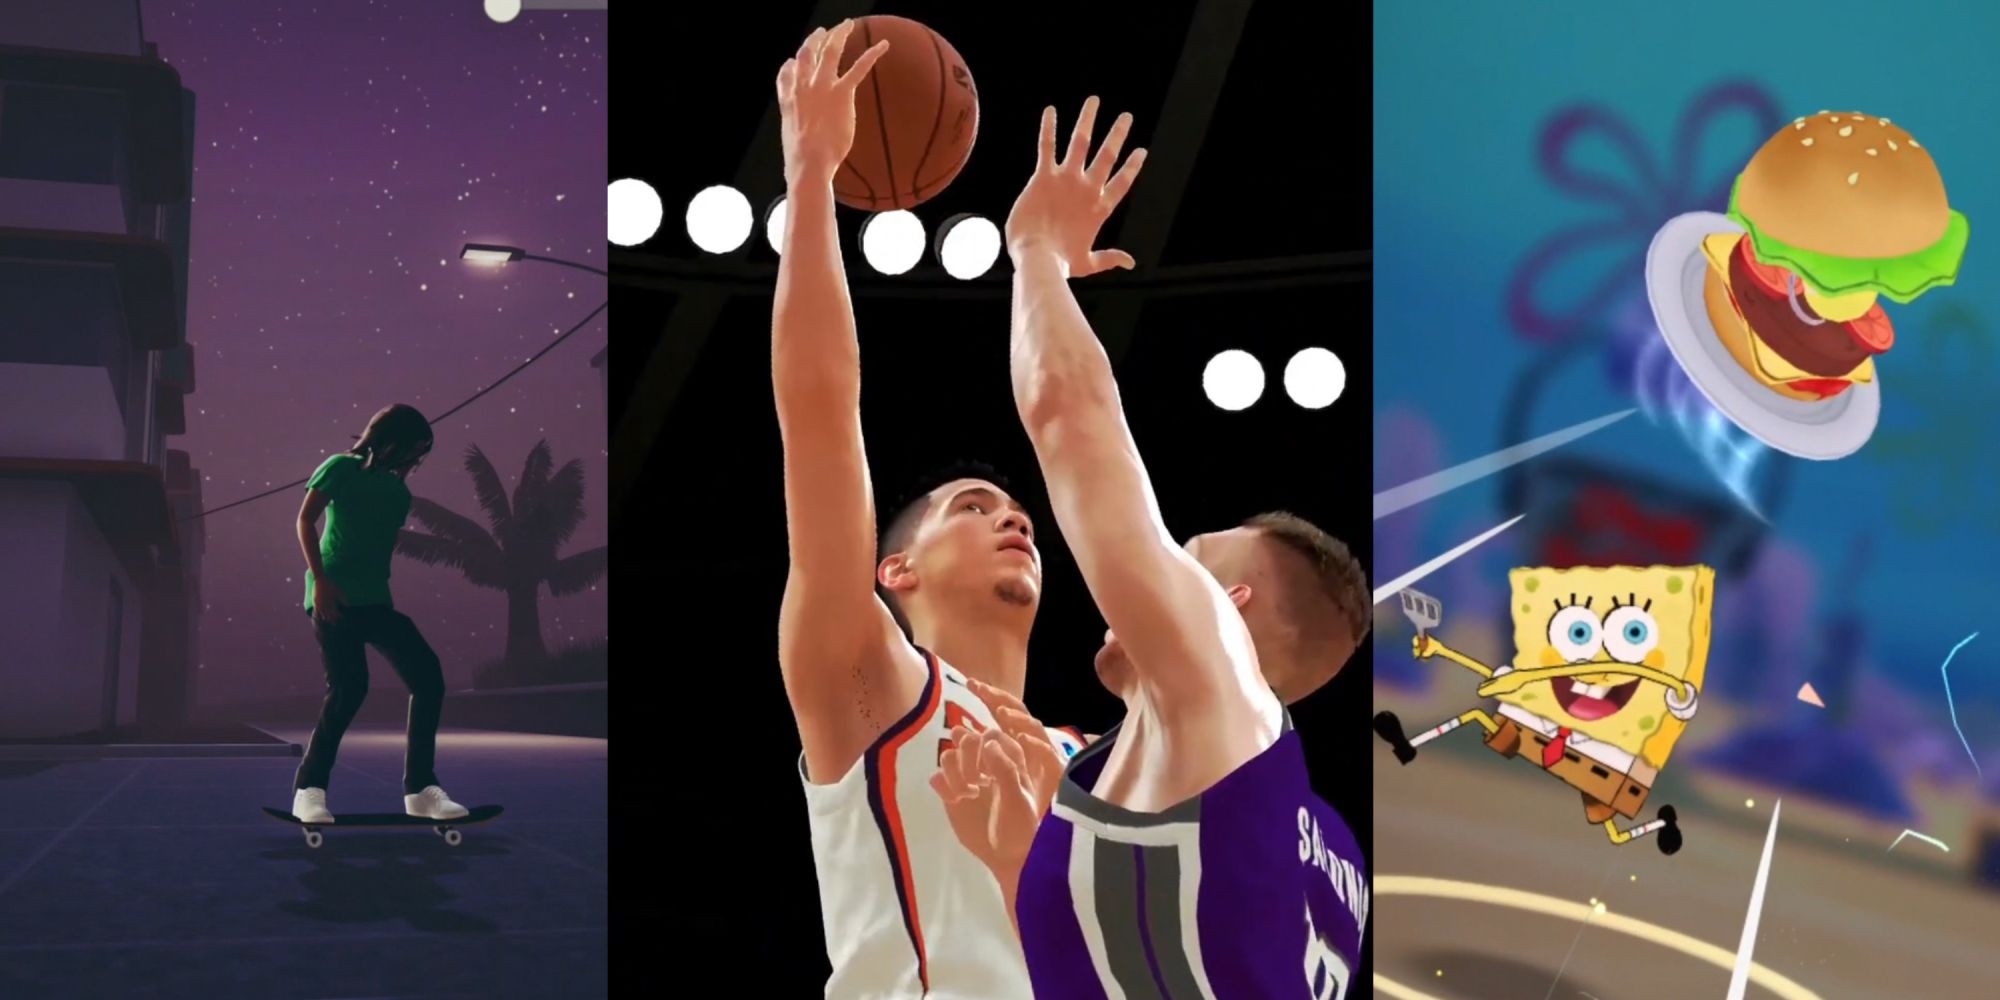 Collage of best sports game on Apple Arcade including screenshots of Skating, Basketball and Nickelodeon Tennis